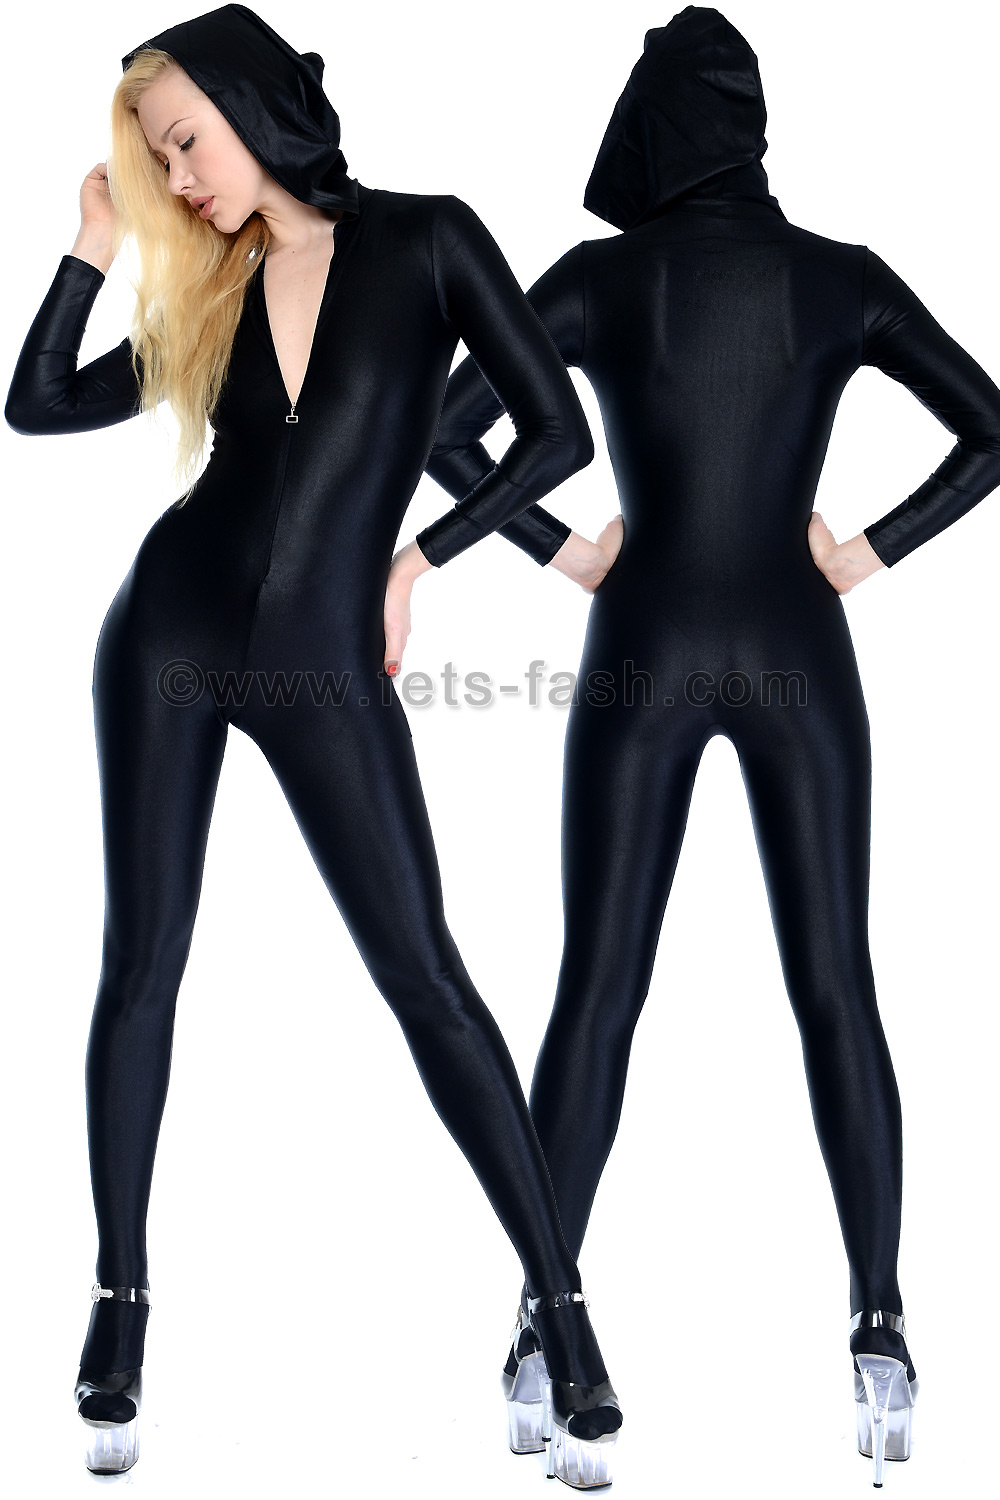 Catsuit With Front Zipper And Hood From Fets Fash In All Lycra Colors Flexib 6686